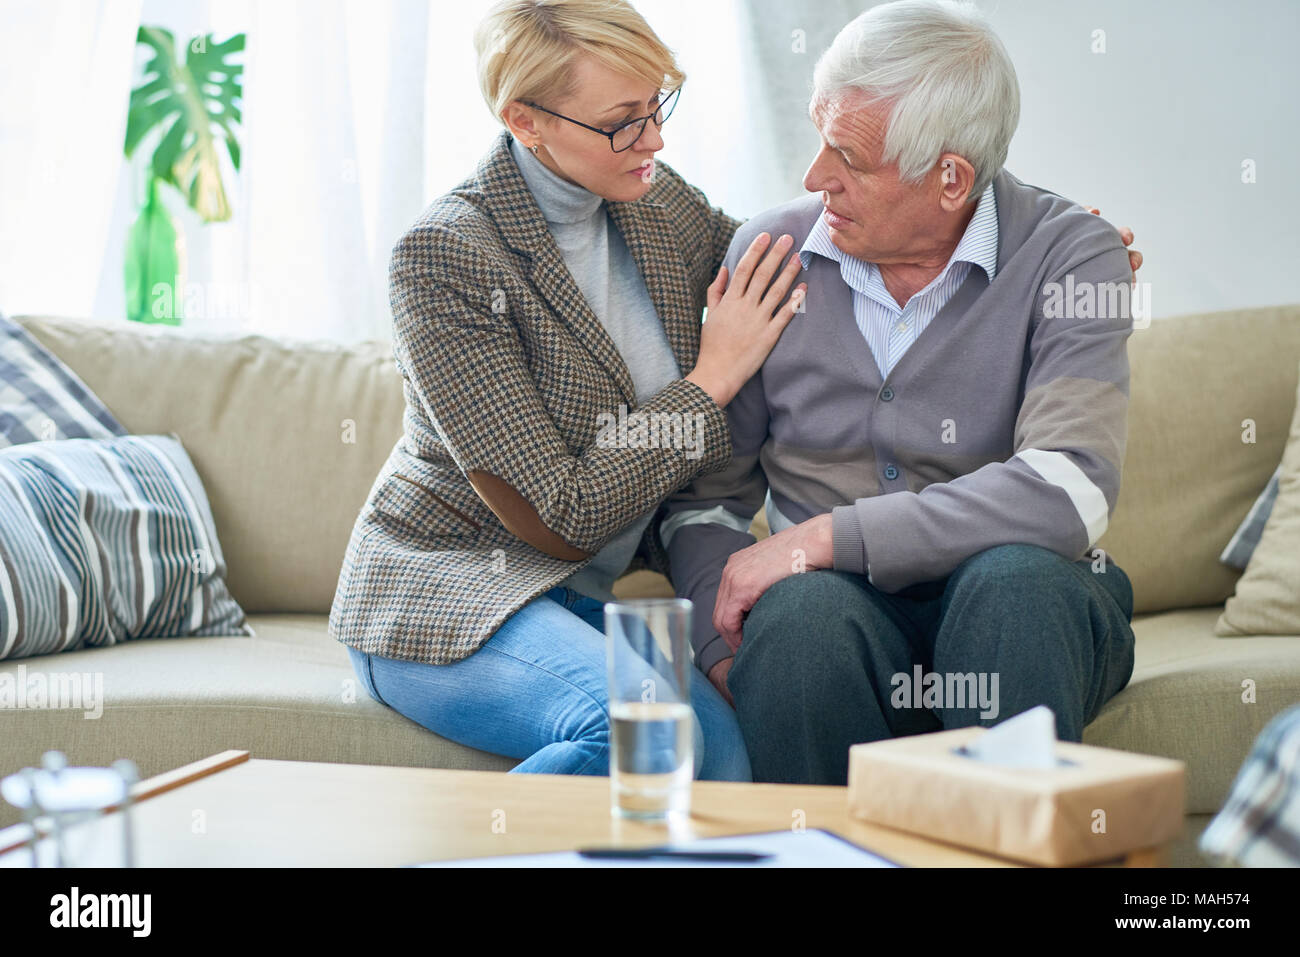 Senior Man Talking to Psychologist in Session Stock Photo